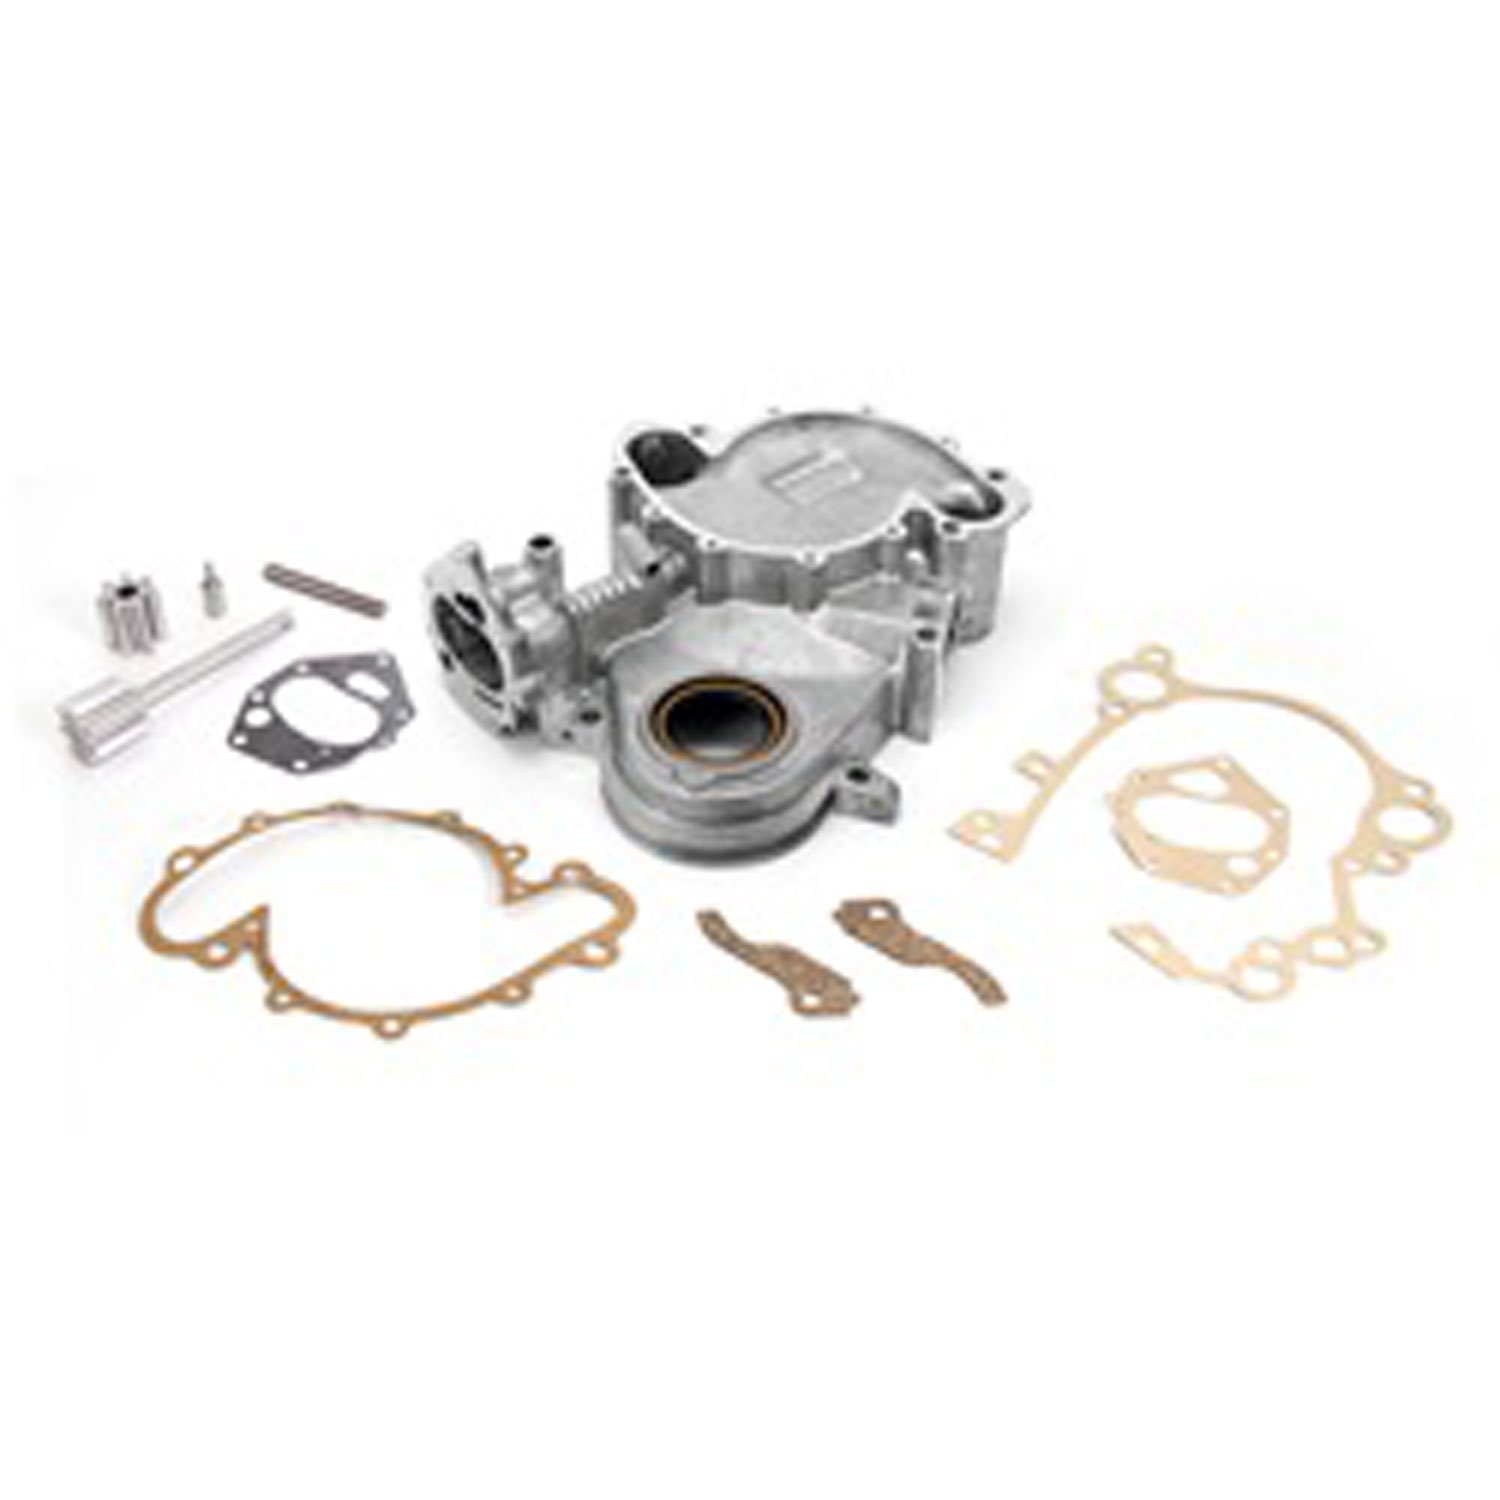 Timing Chain Cover Kit for1966-1991 AMC 290, 304,